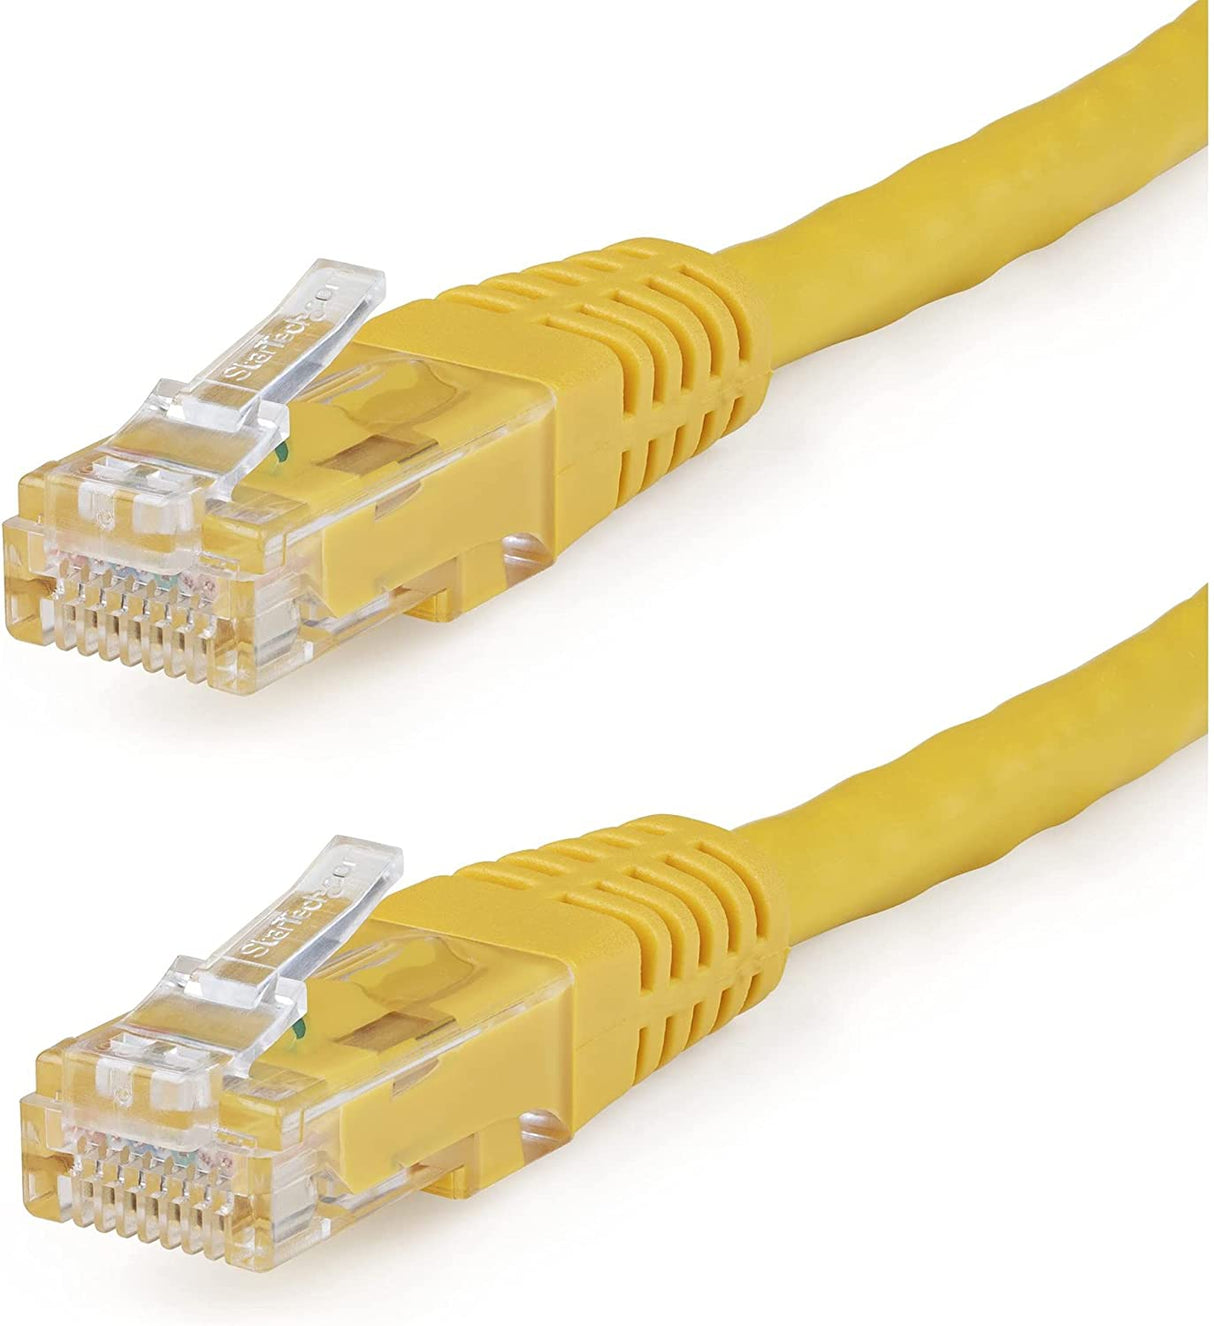 StarTech.com 3ft CAT6 Ethernet Cable - Yellow CAT 6 Gigabit Ethernet Wire -650MHz 100W PoE++ RJ45 UTP Molded Category 6 Network/Patch Cord w/Strain Relief/Fluke Tested UL/TIA Certified (C6PATCH3YL) Yellow 3 ft / 0.9 m 1 Pack